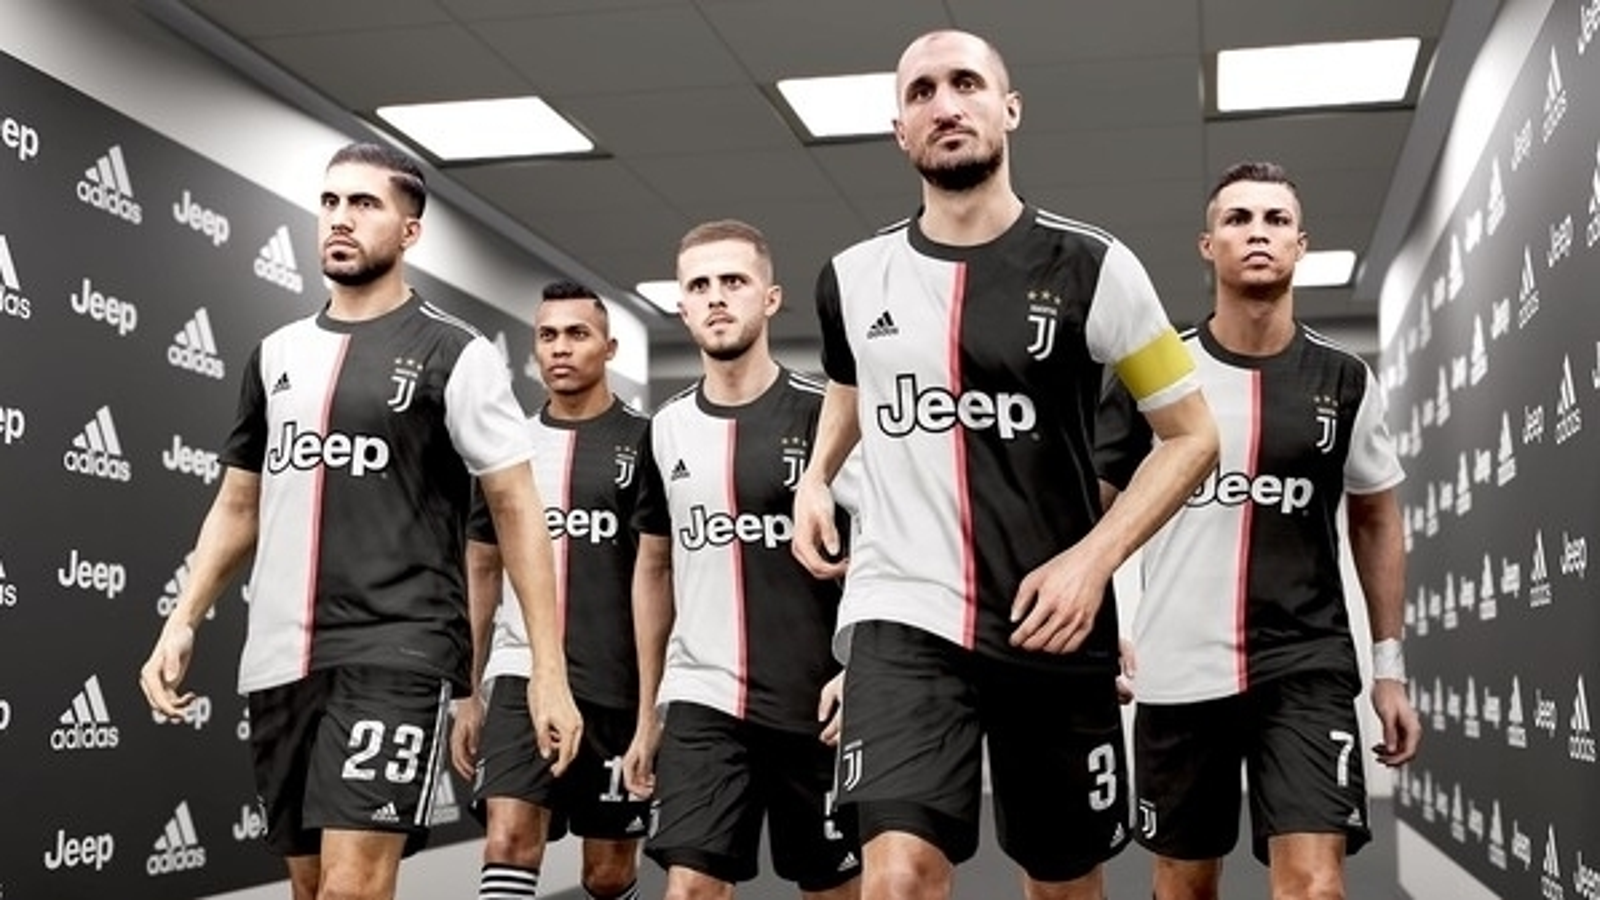 Wepes Sport: Uniforme Real Madrid - Pes 2017 (PC/PS3)